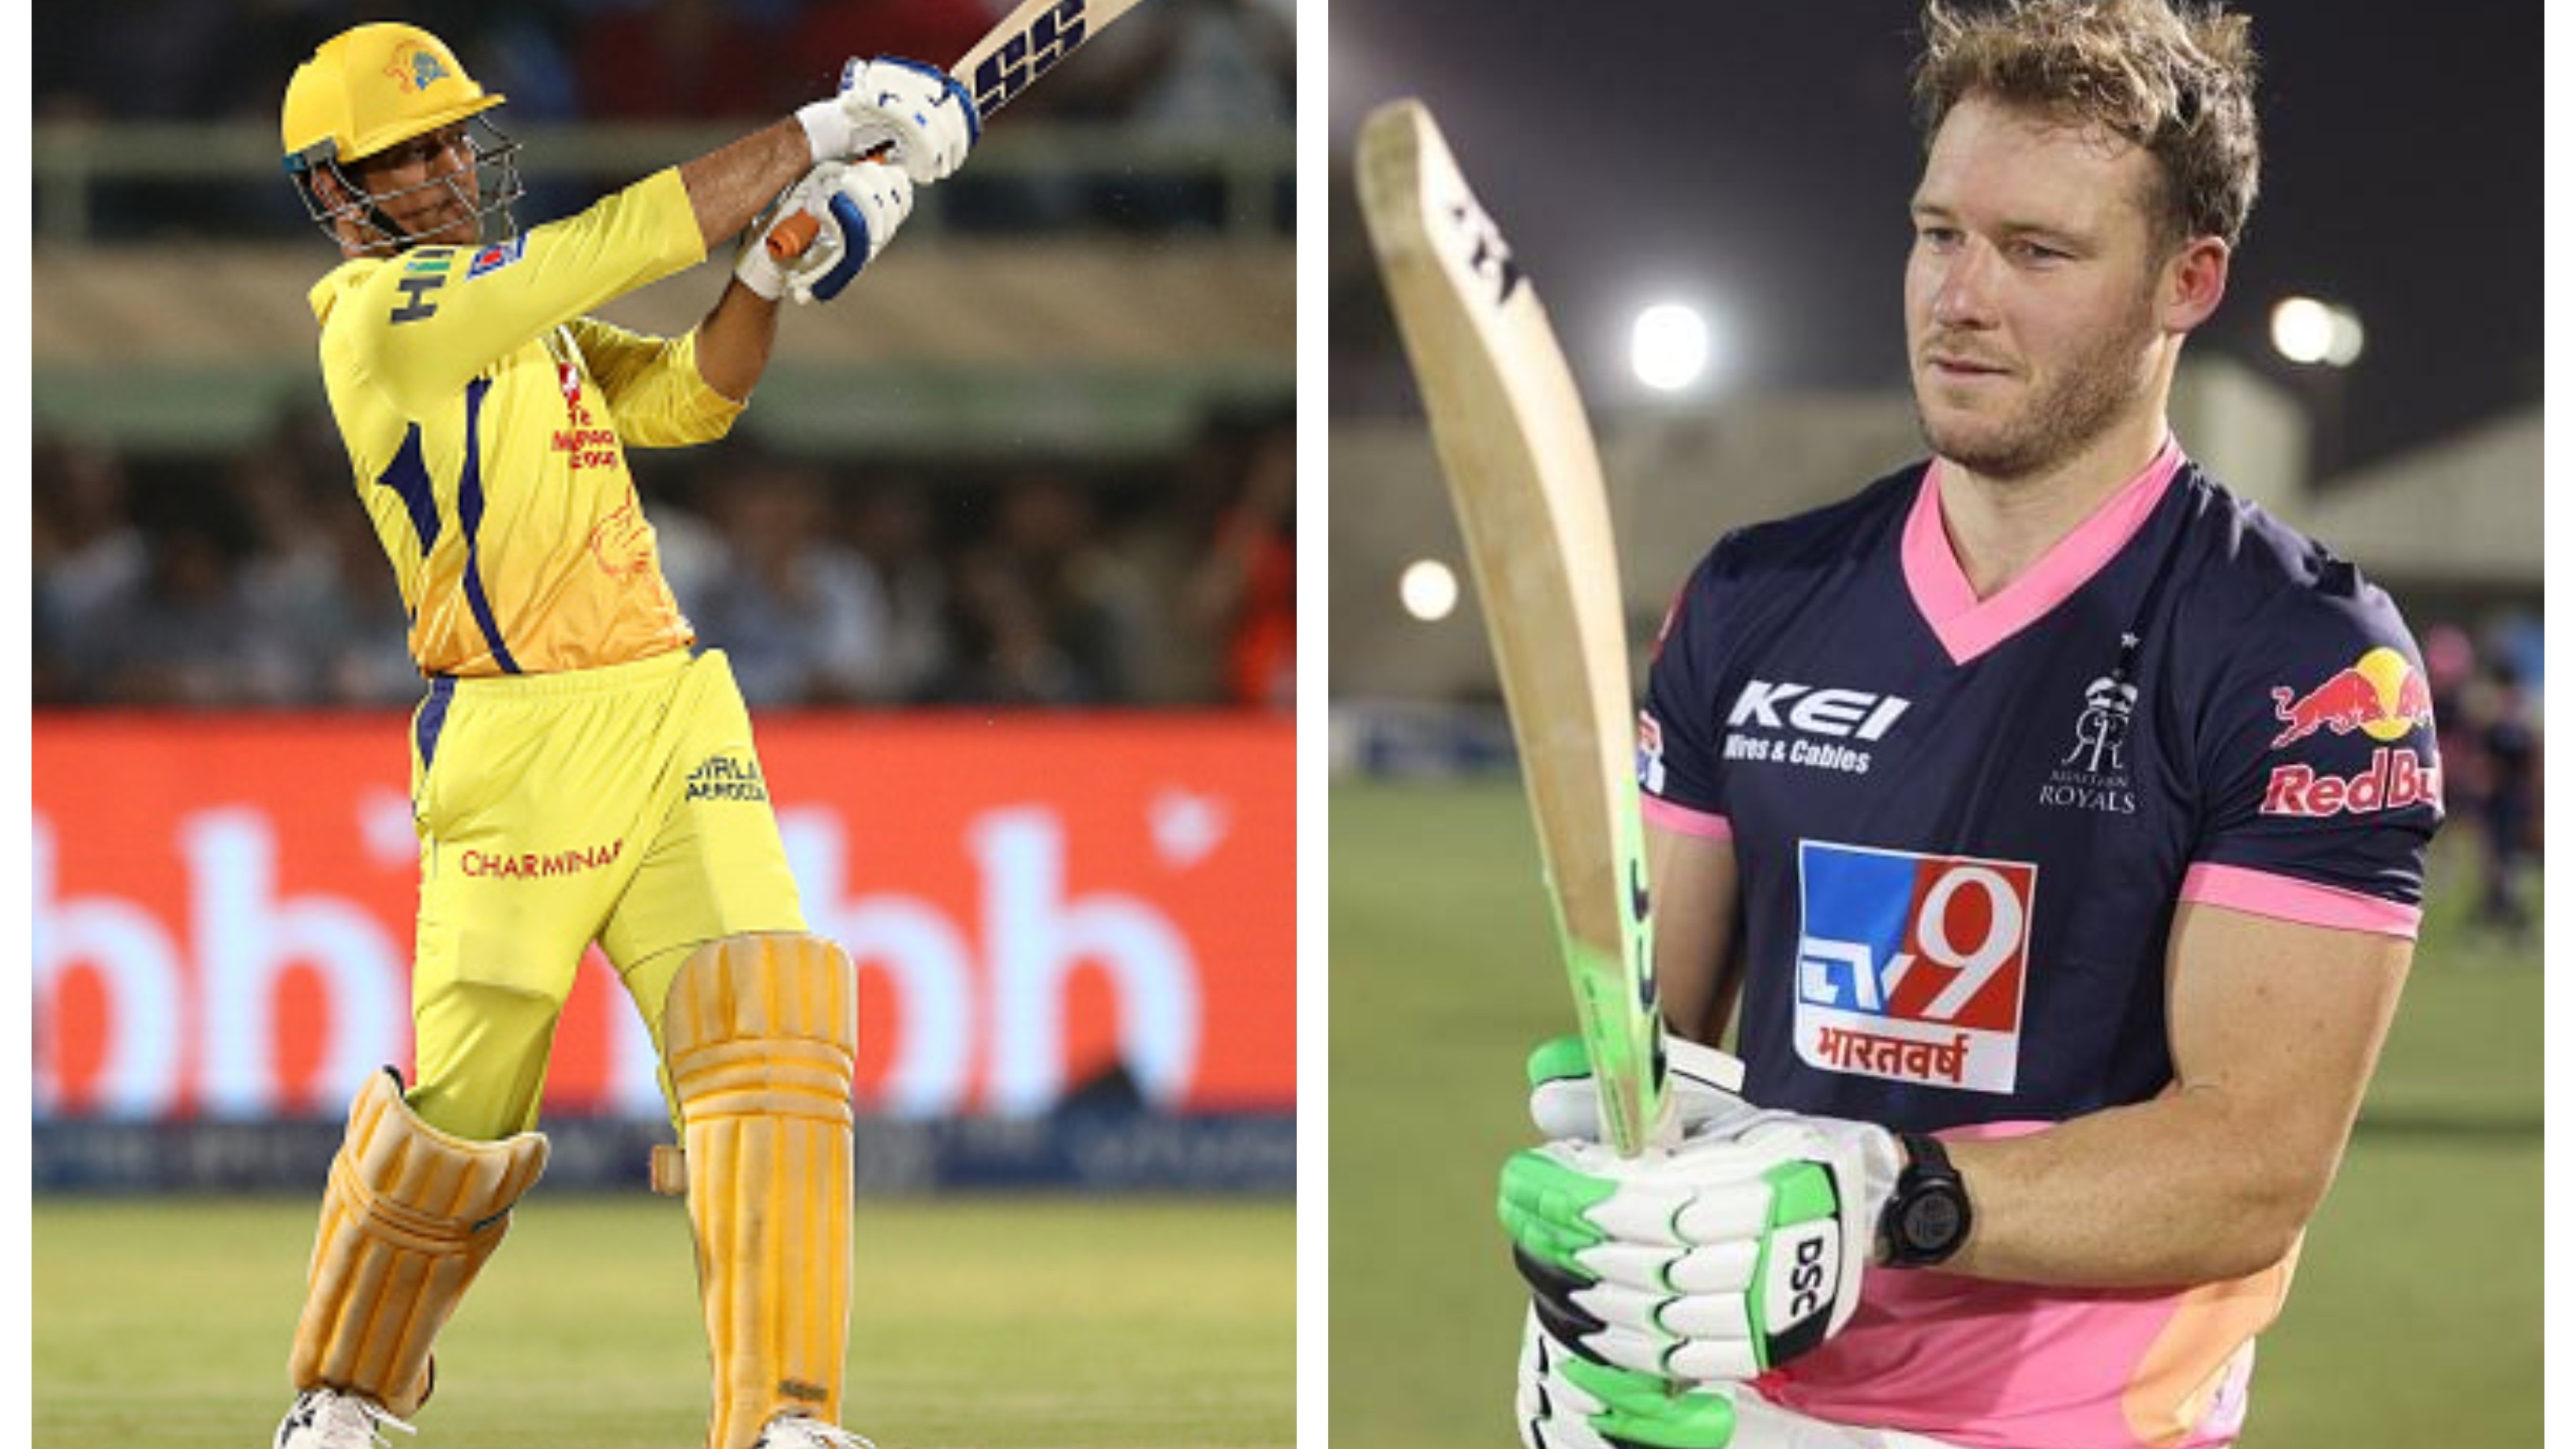 IPL 2020: ‘I want to finish games like MS Dhoni does’, says David Miller